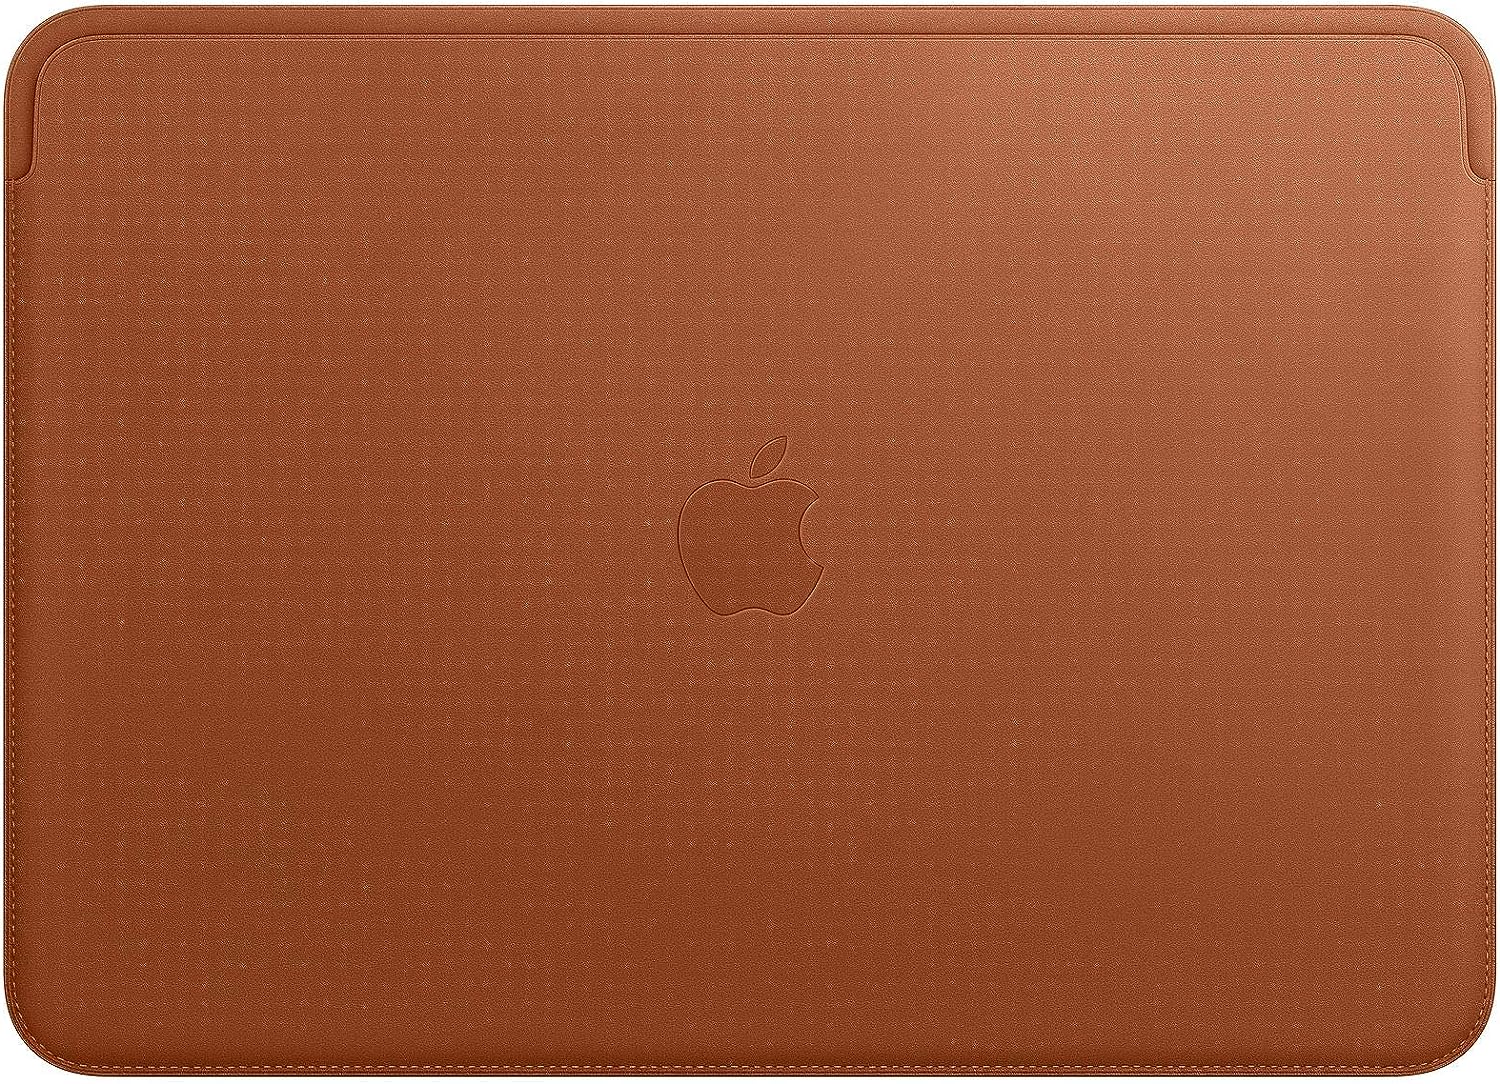 Apple Leather Sleeve (for 12-inch MacBook) – Saddle Brown: Detailed Review & Recommendations